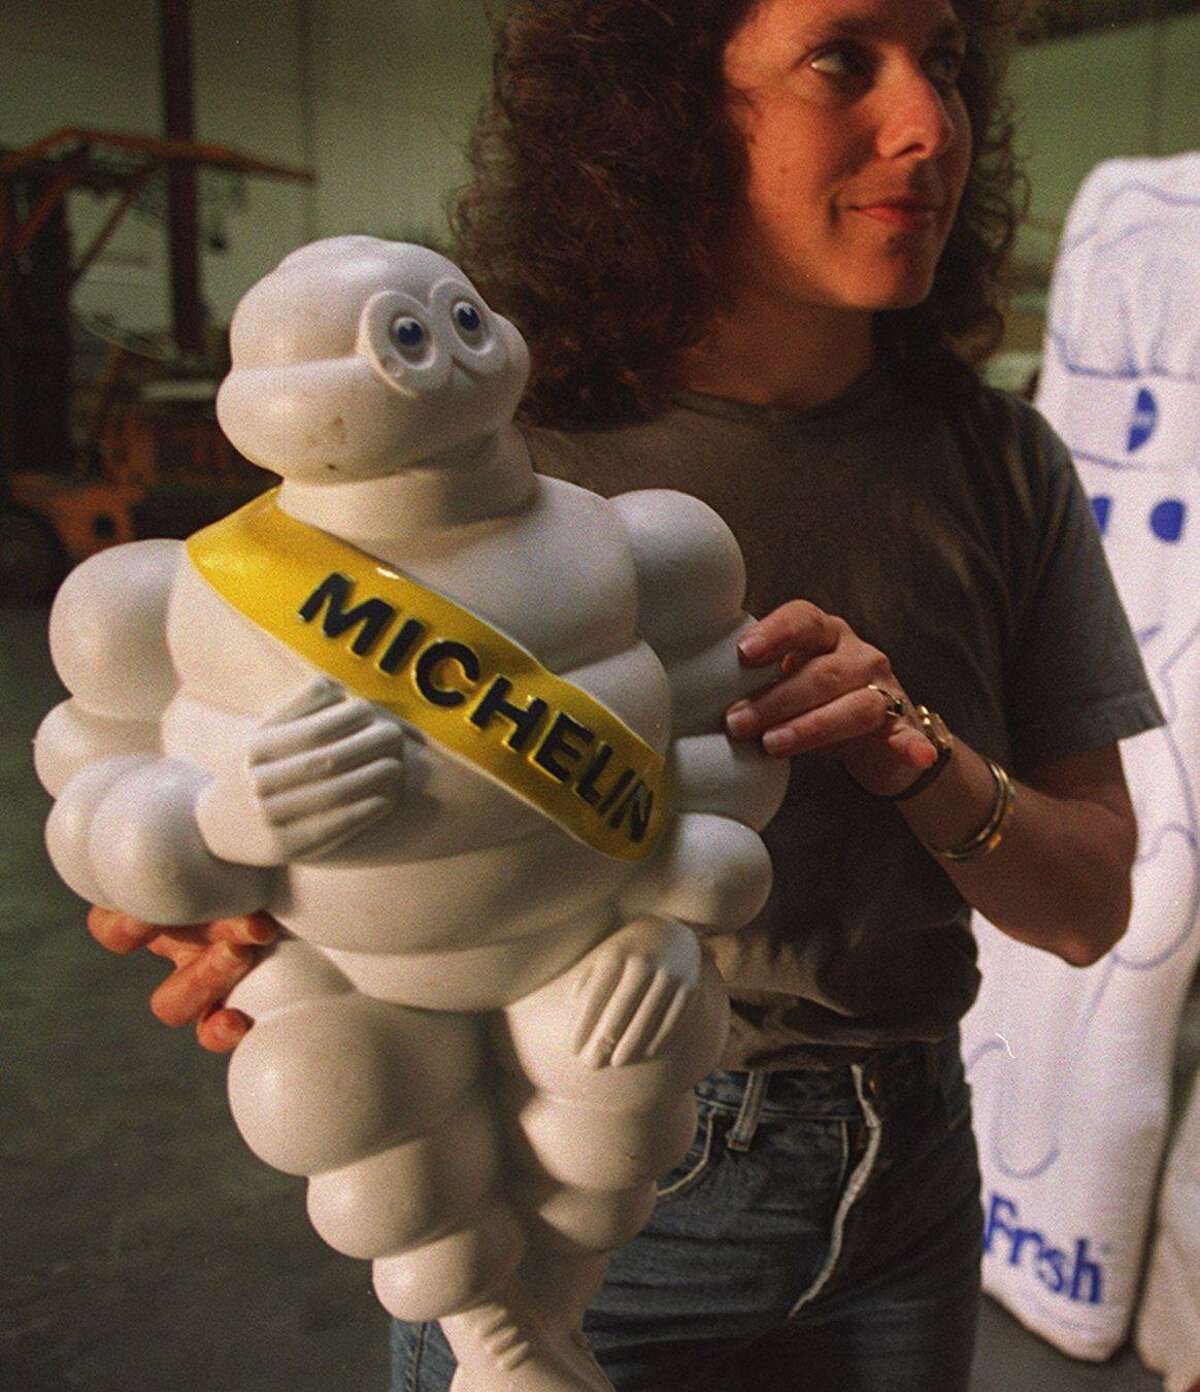 Ellen Weis holds a figurine of the Michelin Man at the Museum of Modern Mythology in San Francisco in 1996.